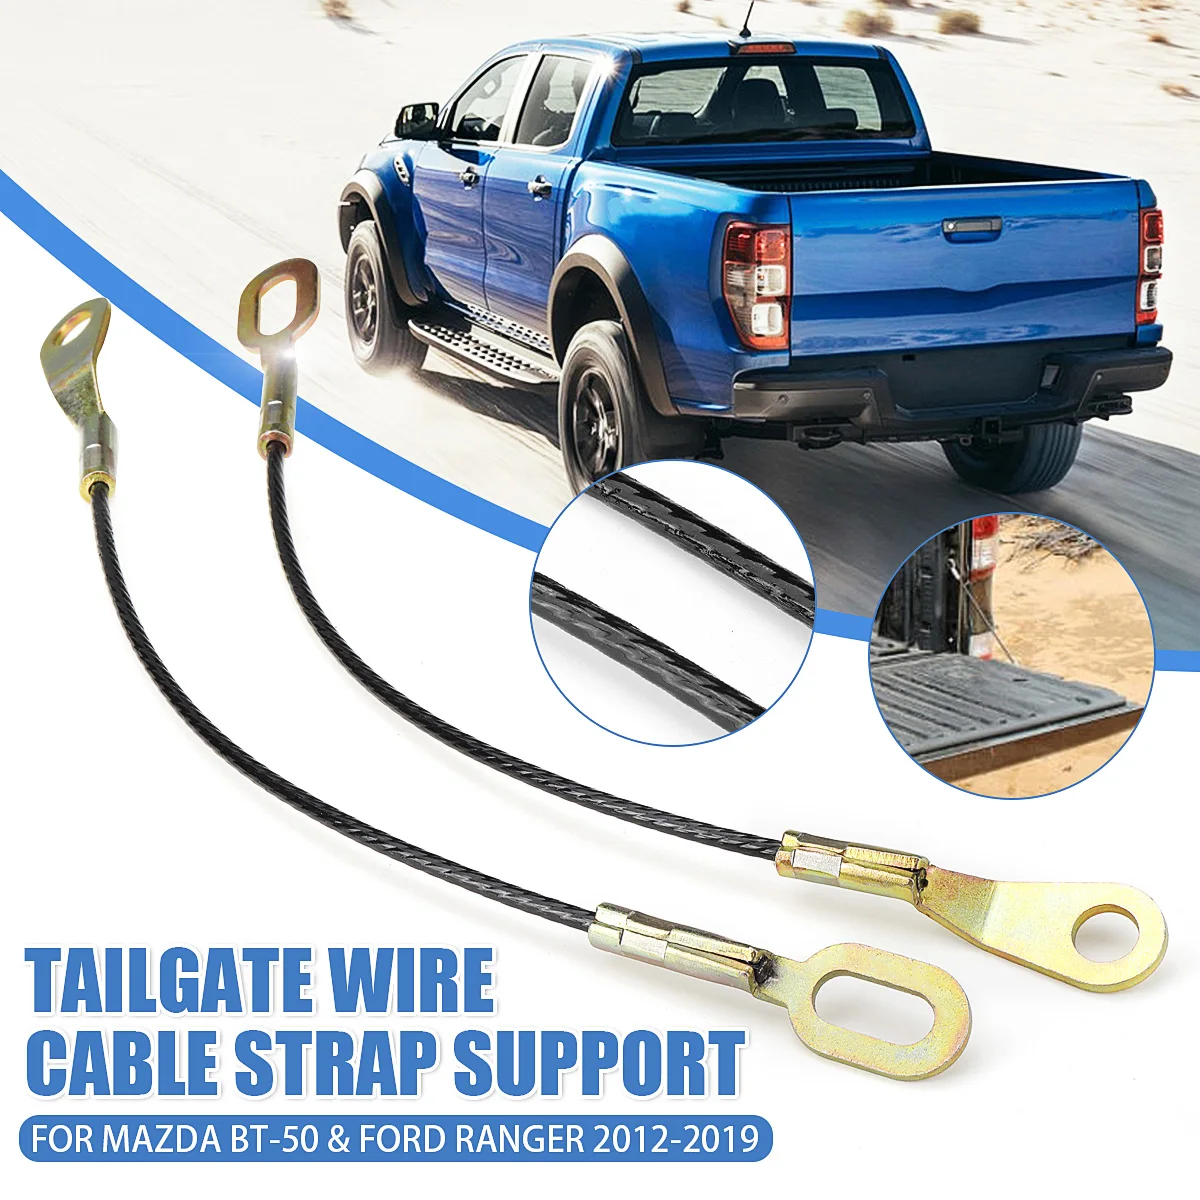 Outside of North America K1AutoParts Strap Tailgate Wire Cable Rear Tail Gate For Ford Ranger 2006 2007 2008 2009 2010 2011 International Model